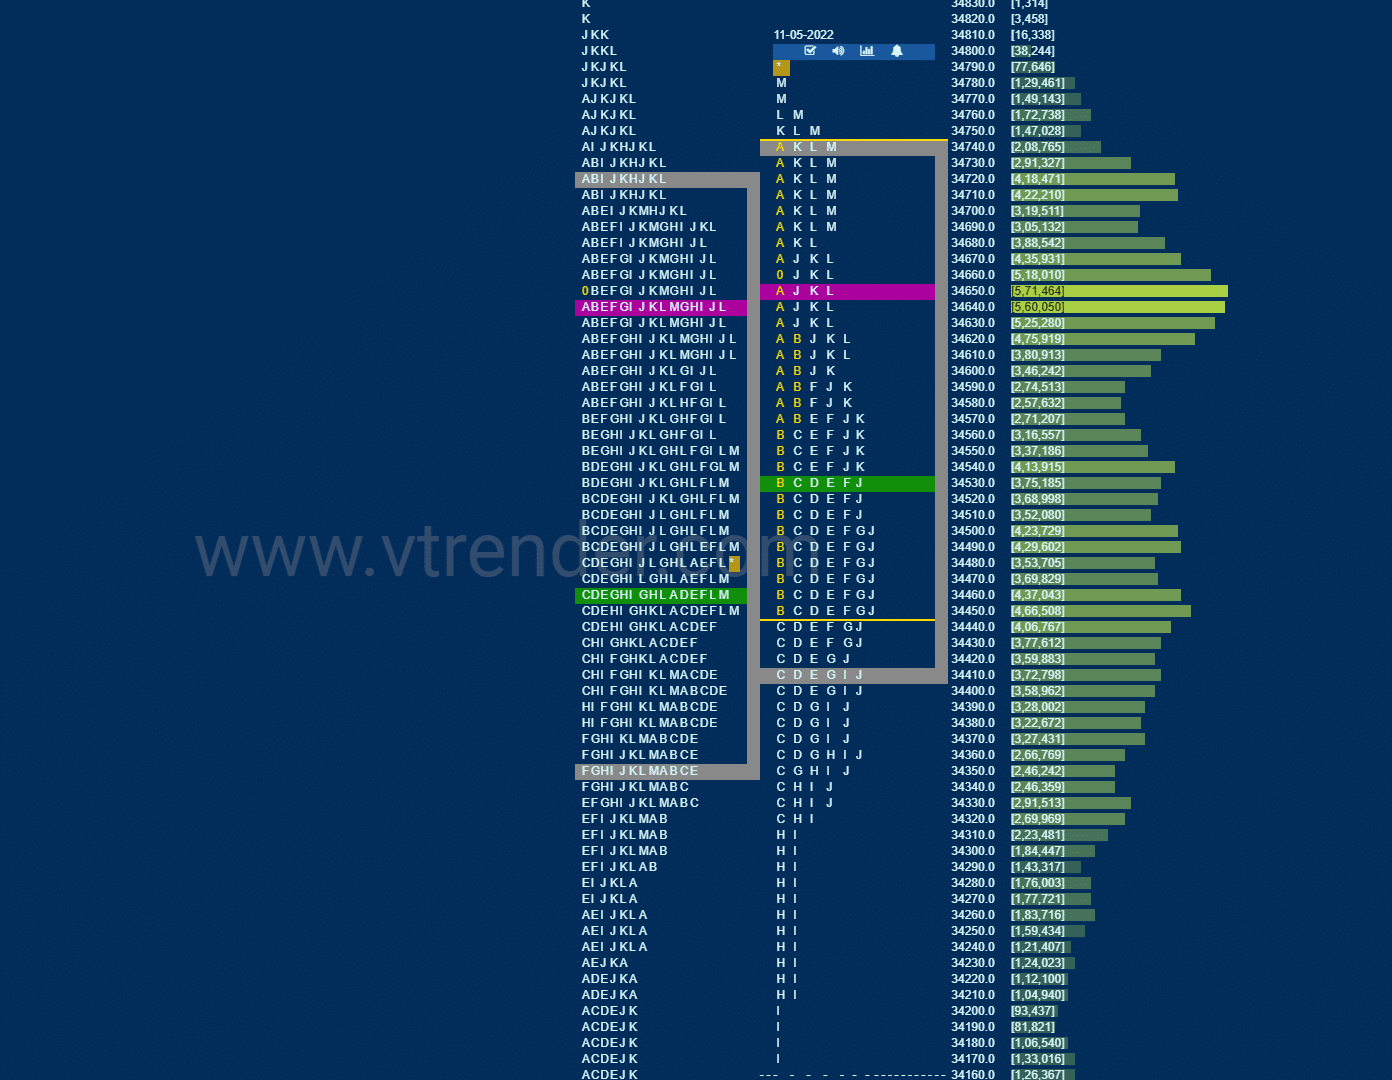 Bnf 7 Market Profile Analysis Dated 11Th May 2022 Banknifty Futures, Charts, Day Trading, Intraday Trading, Intraday Trading Strategies, Market Profile, Market Profile Trading Strategies, Nifty Futures, Order Flow Analysis, Support And Resistance, Technical Analysis, Trading Strategies, Volume Profile Trading